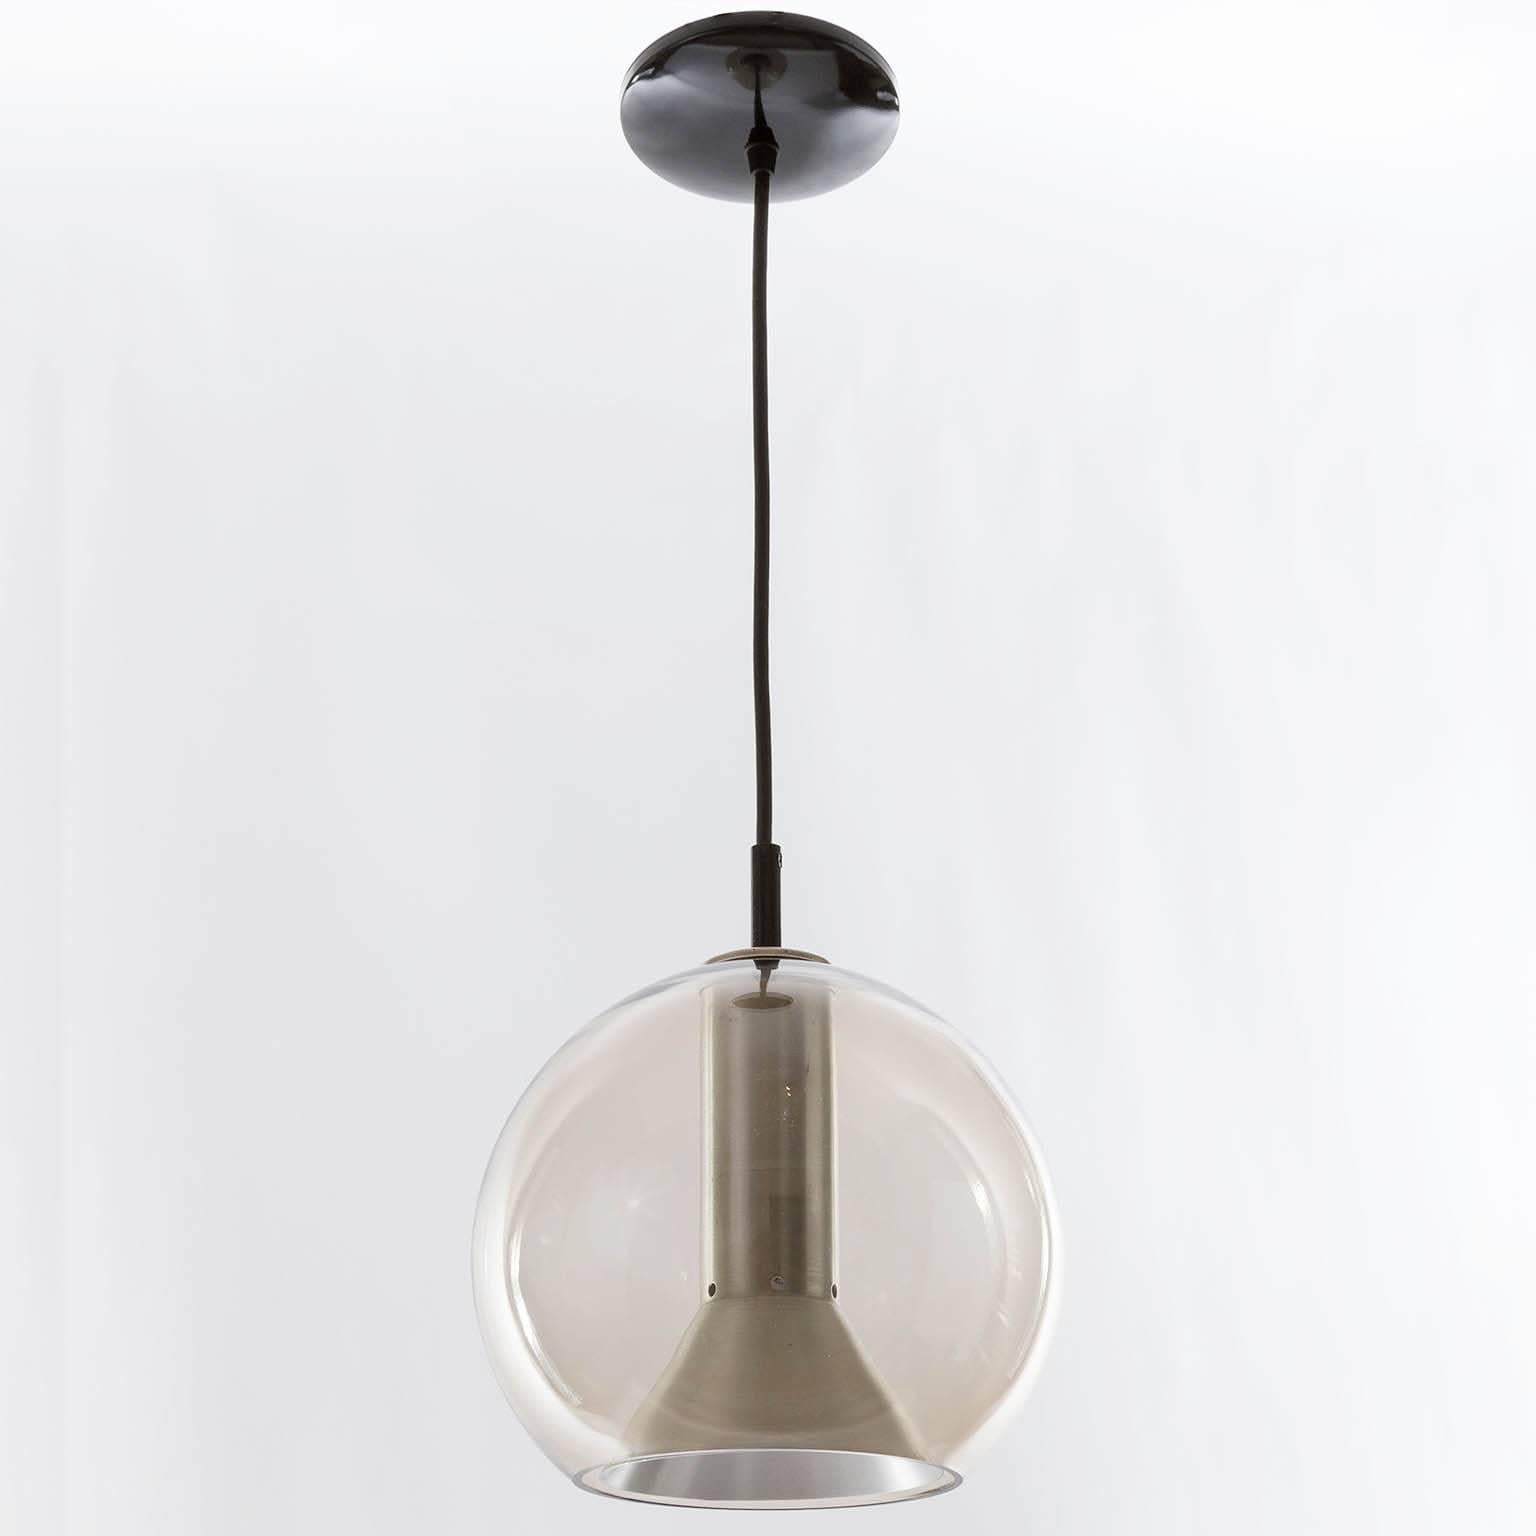 A set of three pendant lights / hanging lamps by Frank Ligtelijn for RAAK Amsterdam, Netherlands, manufactured in the 1960s. They are made of smoked glass globes with aluminum shades. One medium Edison base bulb E26 / E27 per light. A cord in any